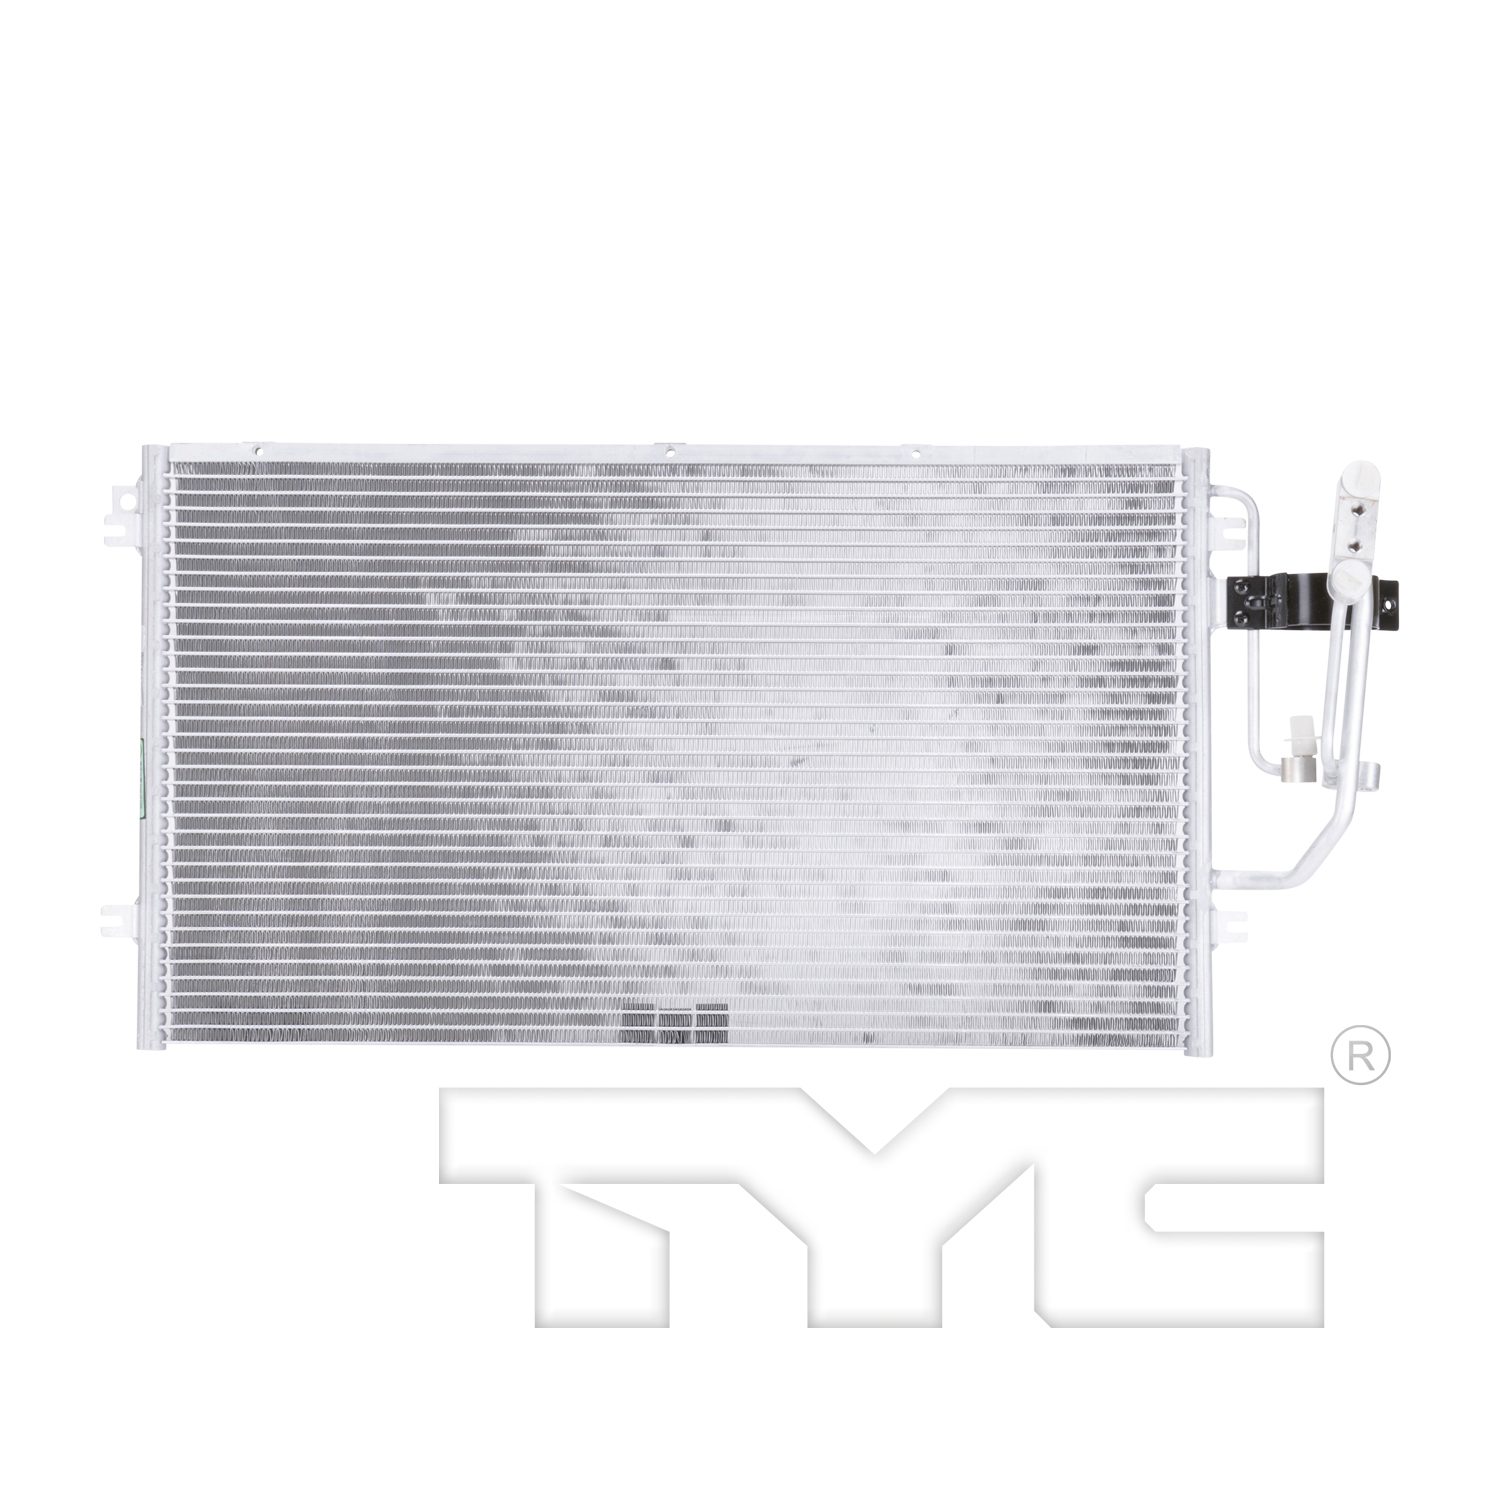 Aftermarket AC CONDENSERS for SATURN - L300, L300,04-05,Air conditioning condenser